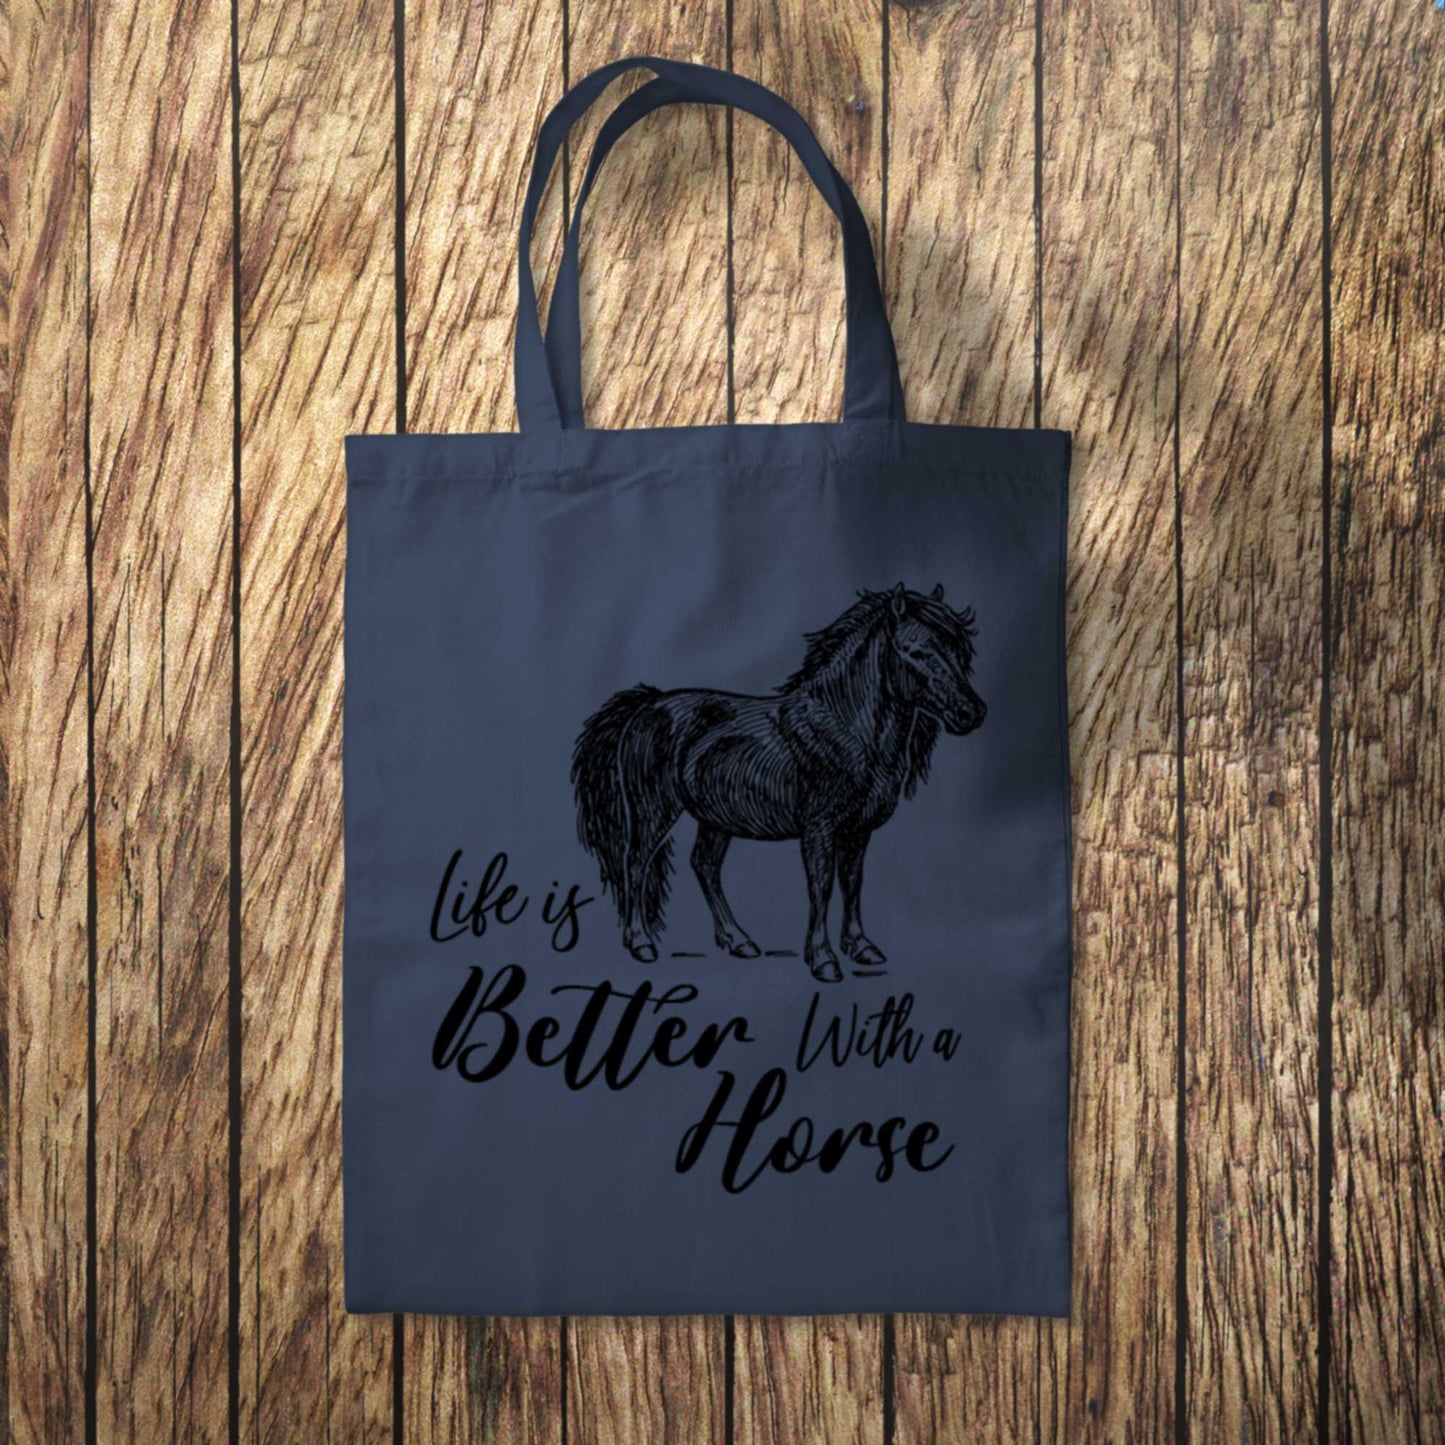 Our Life is Better With a Horse Tote Bag 10L Bag